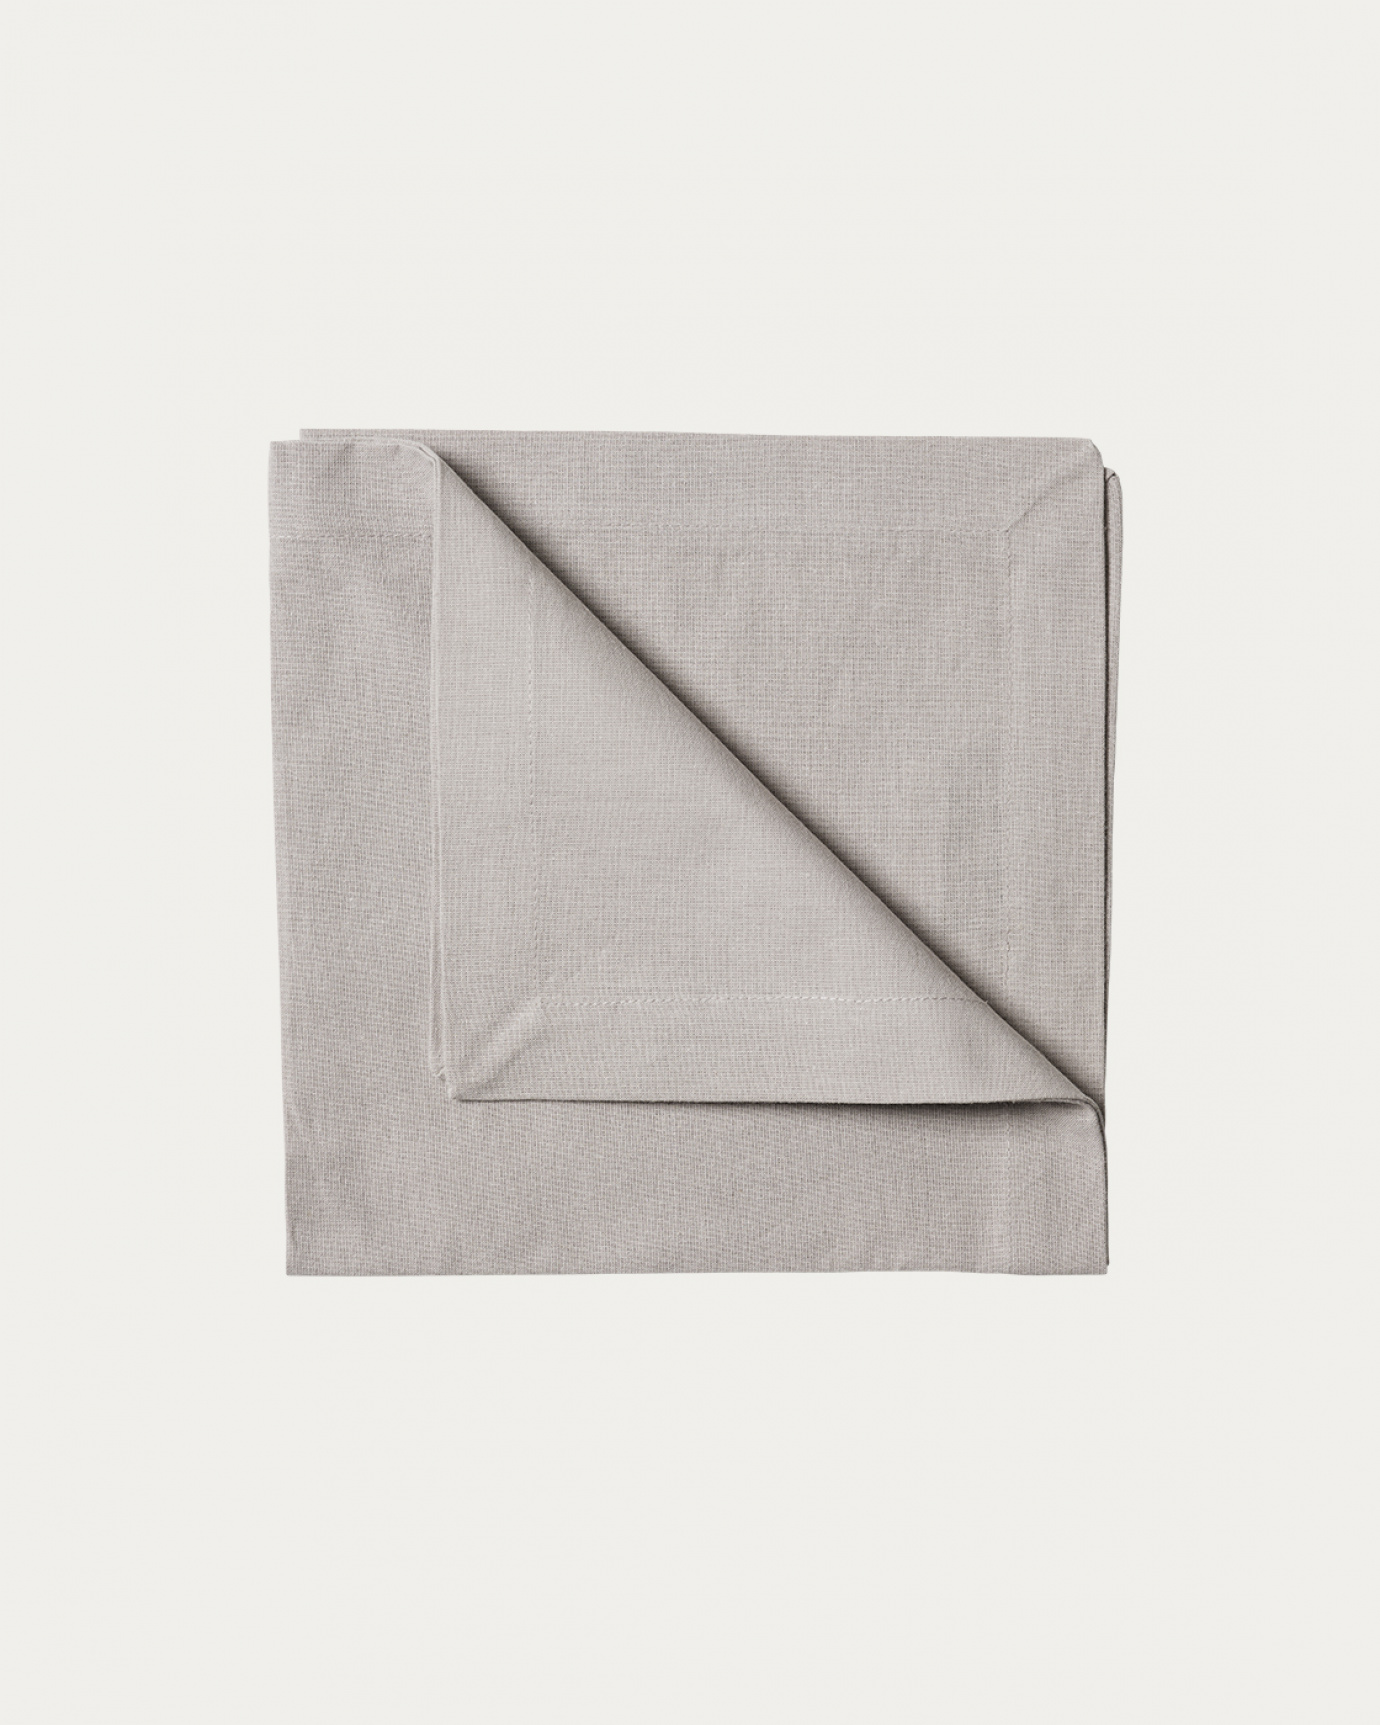 Product image light grey ROBERT napkin made of soft cotton from LINUM DESIGN. Size 45x45 cm and sold in 4-pack.